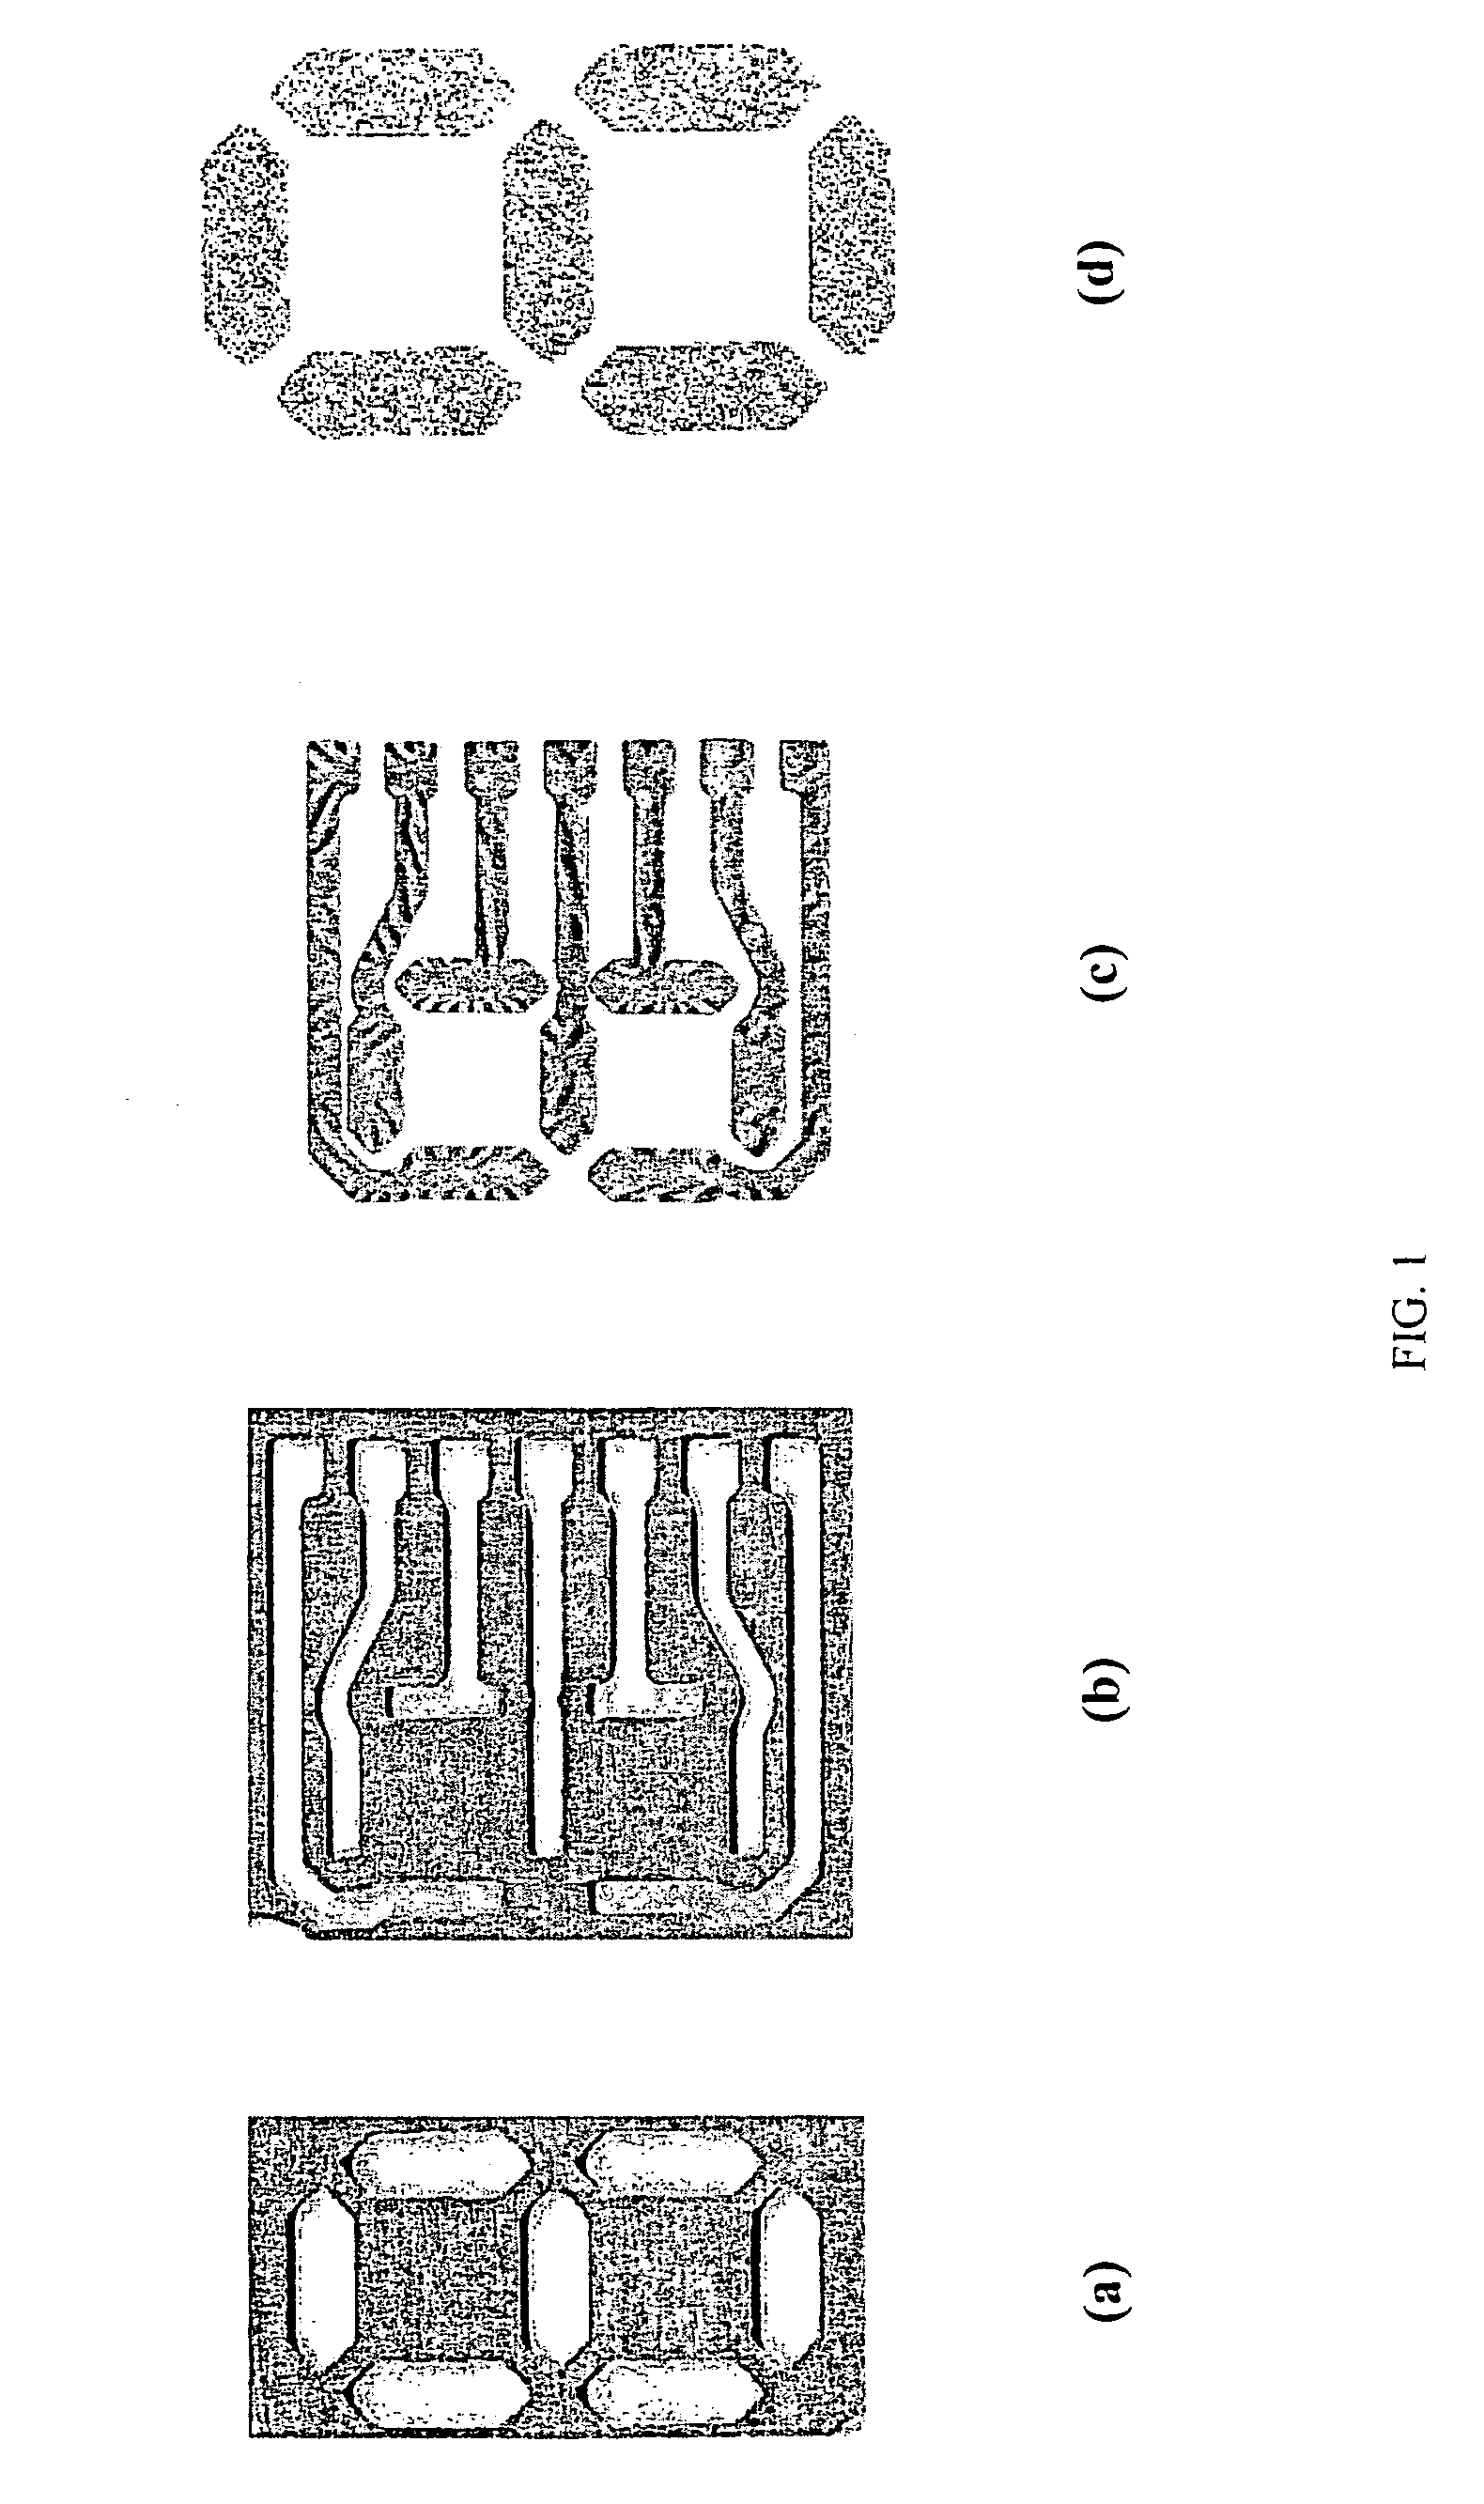 Device for contacting patterned electrodes on porous substrates